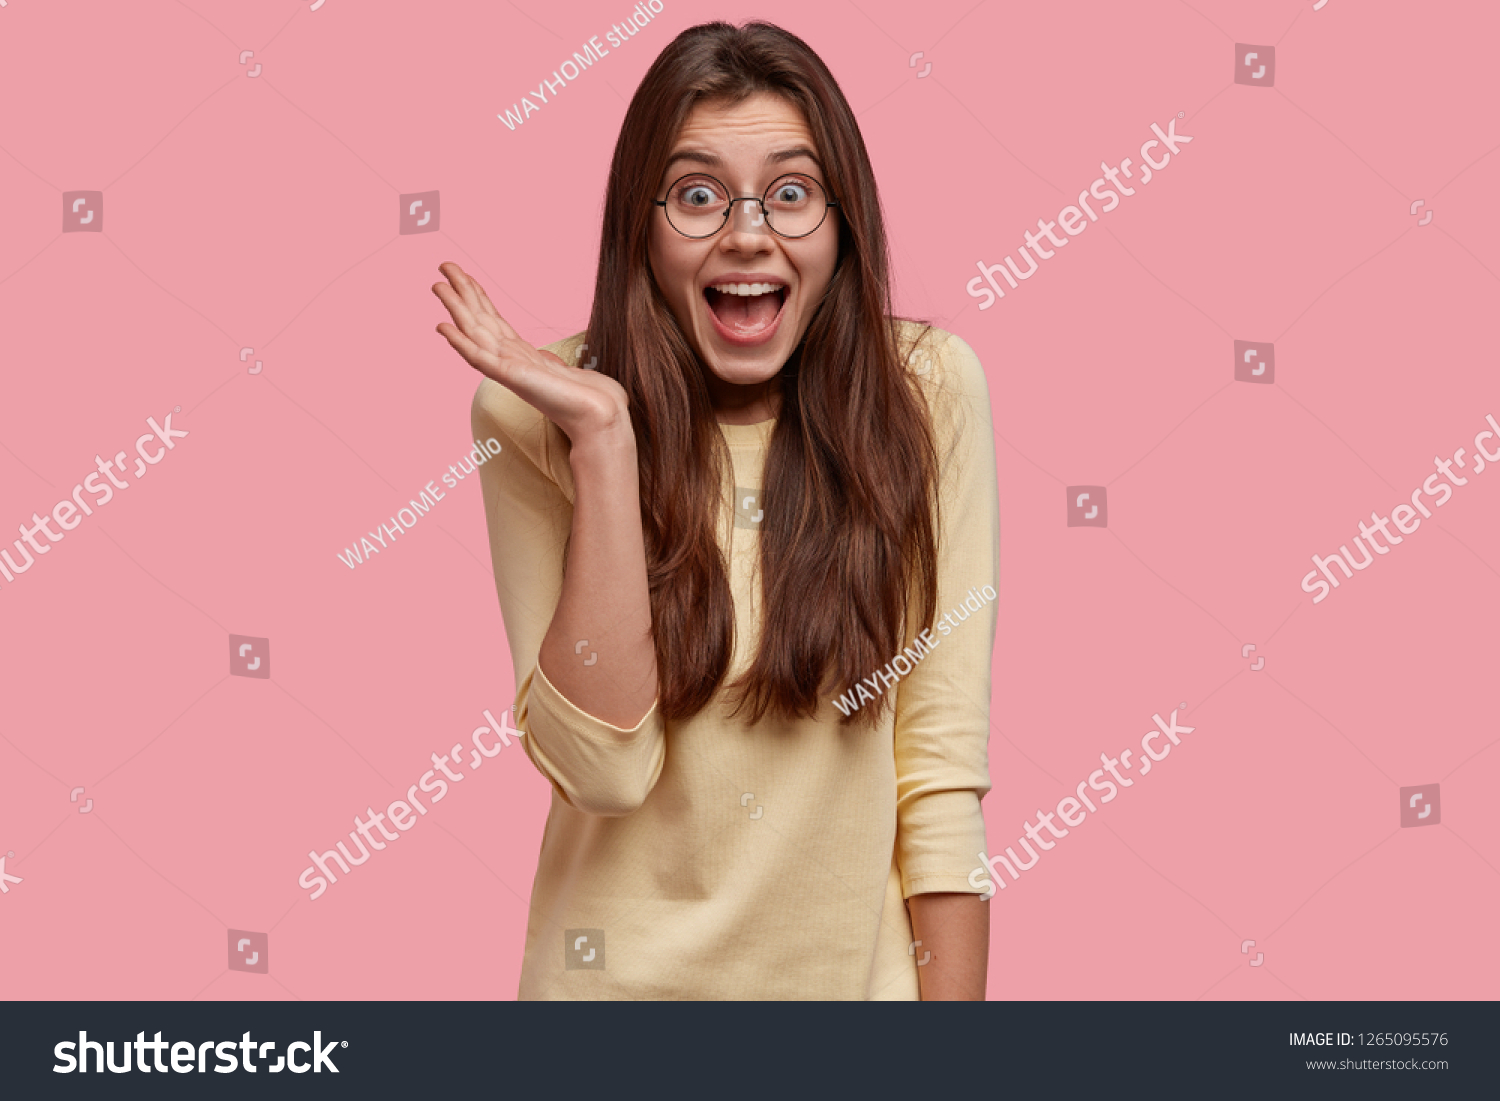 Overjoyed pretty lady keeps hand raised, exclaims with happiness, has long hair, dressed in casual outfit, isolated over pink background, expresses positive emotions. Wow, thats just amazing #1265095576